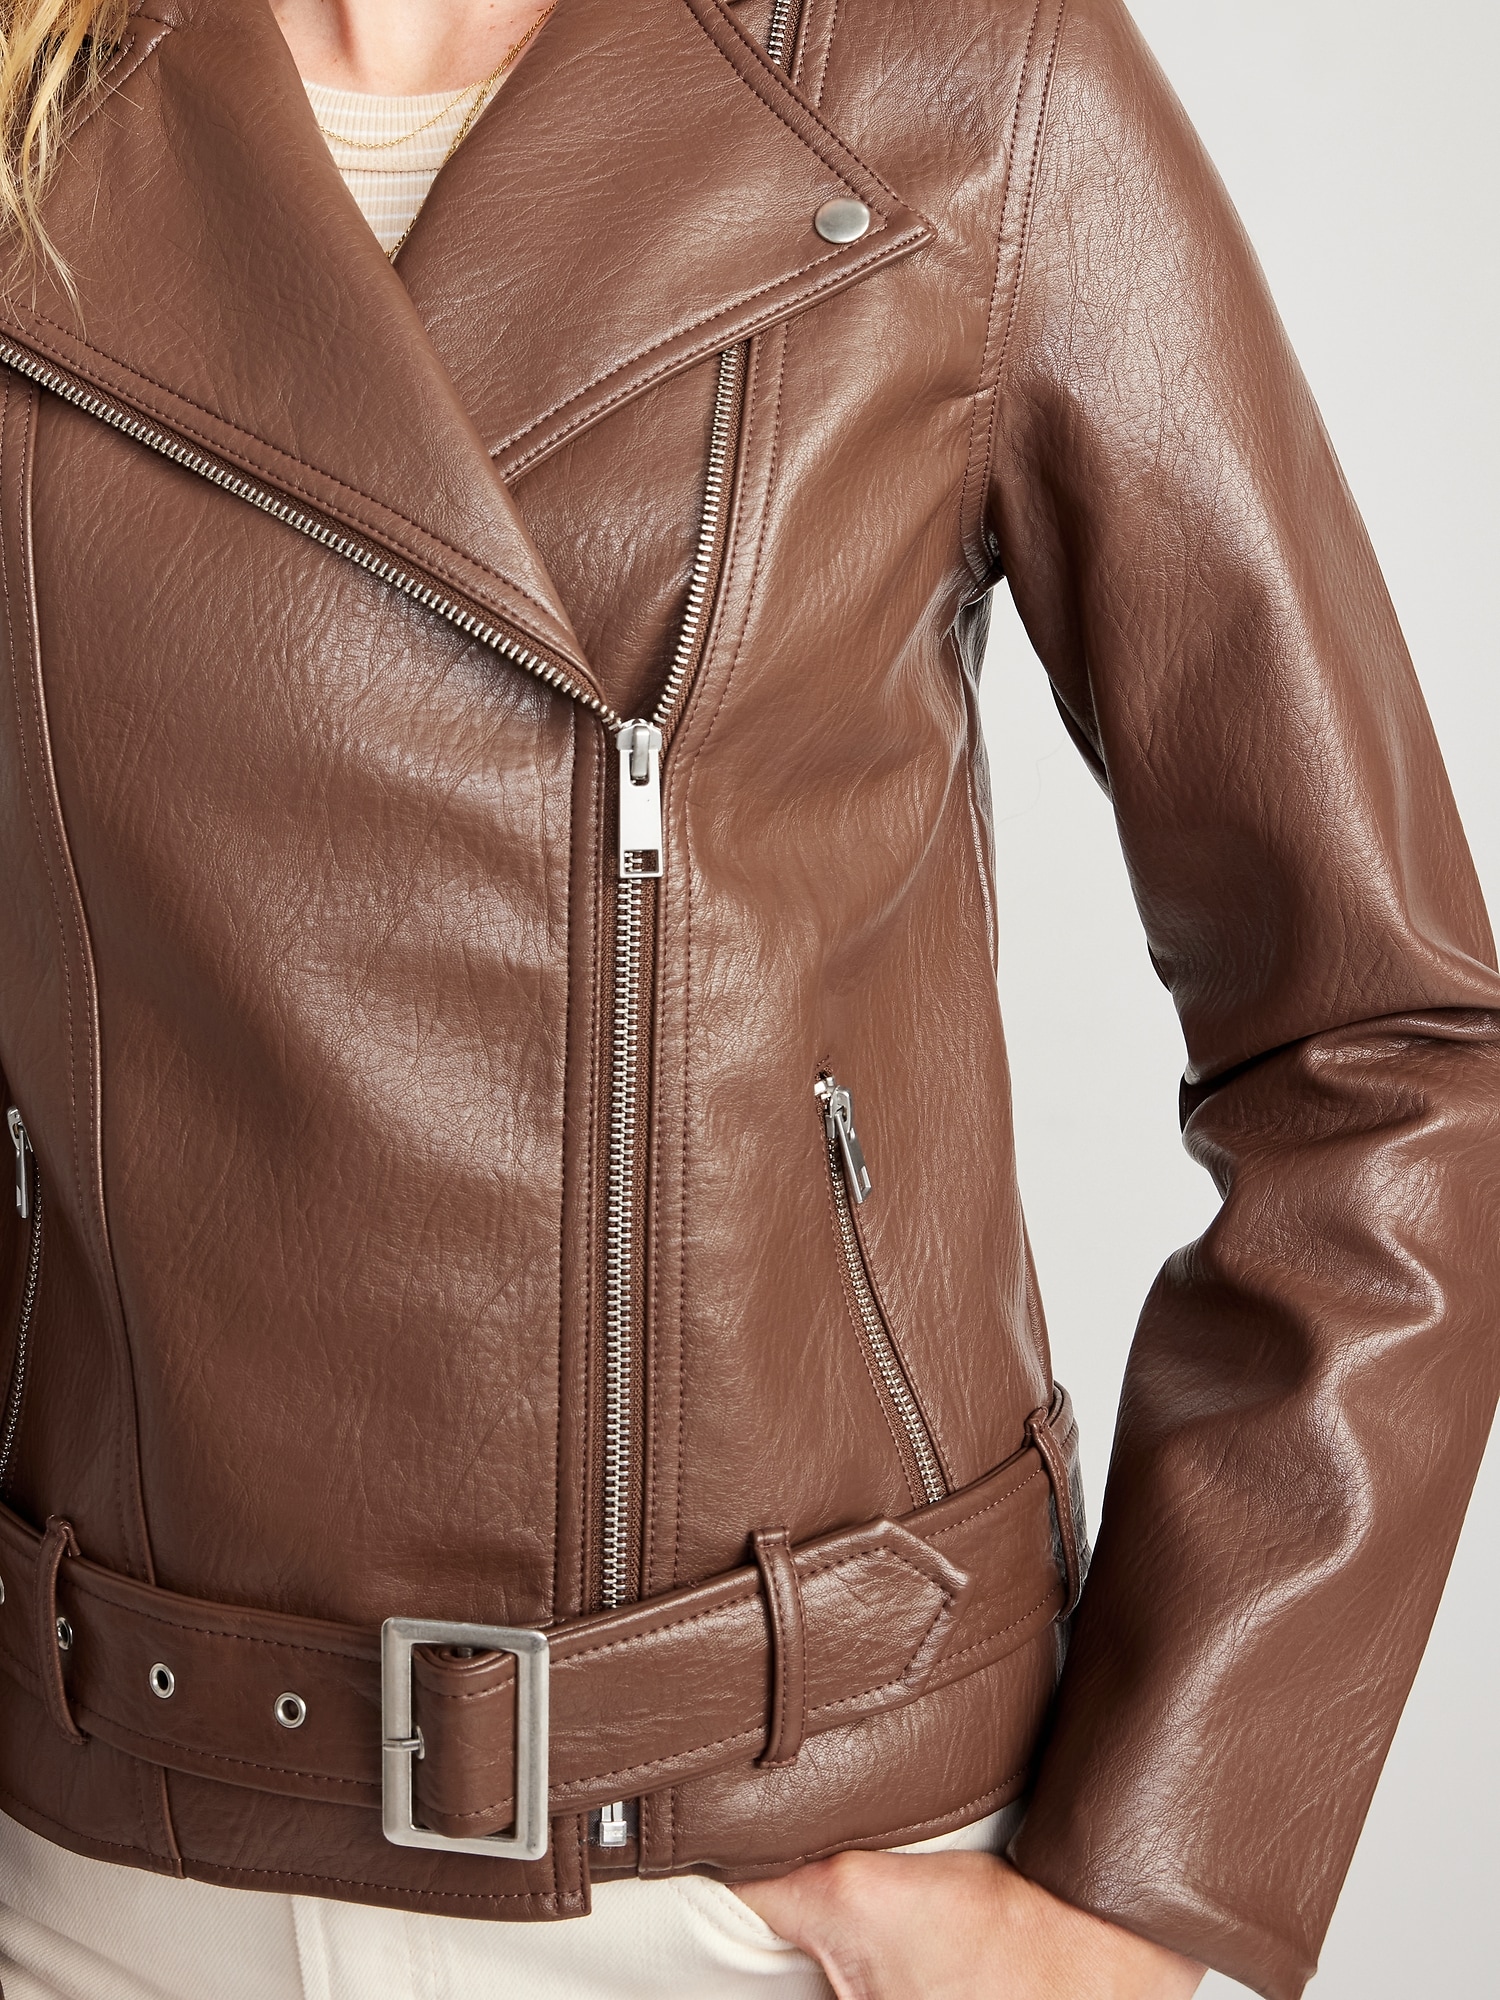 Gallery - Leather Celebrities  Leather dresses, Leather jackets women, Leather  outfits women